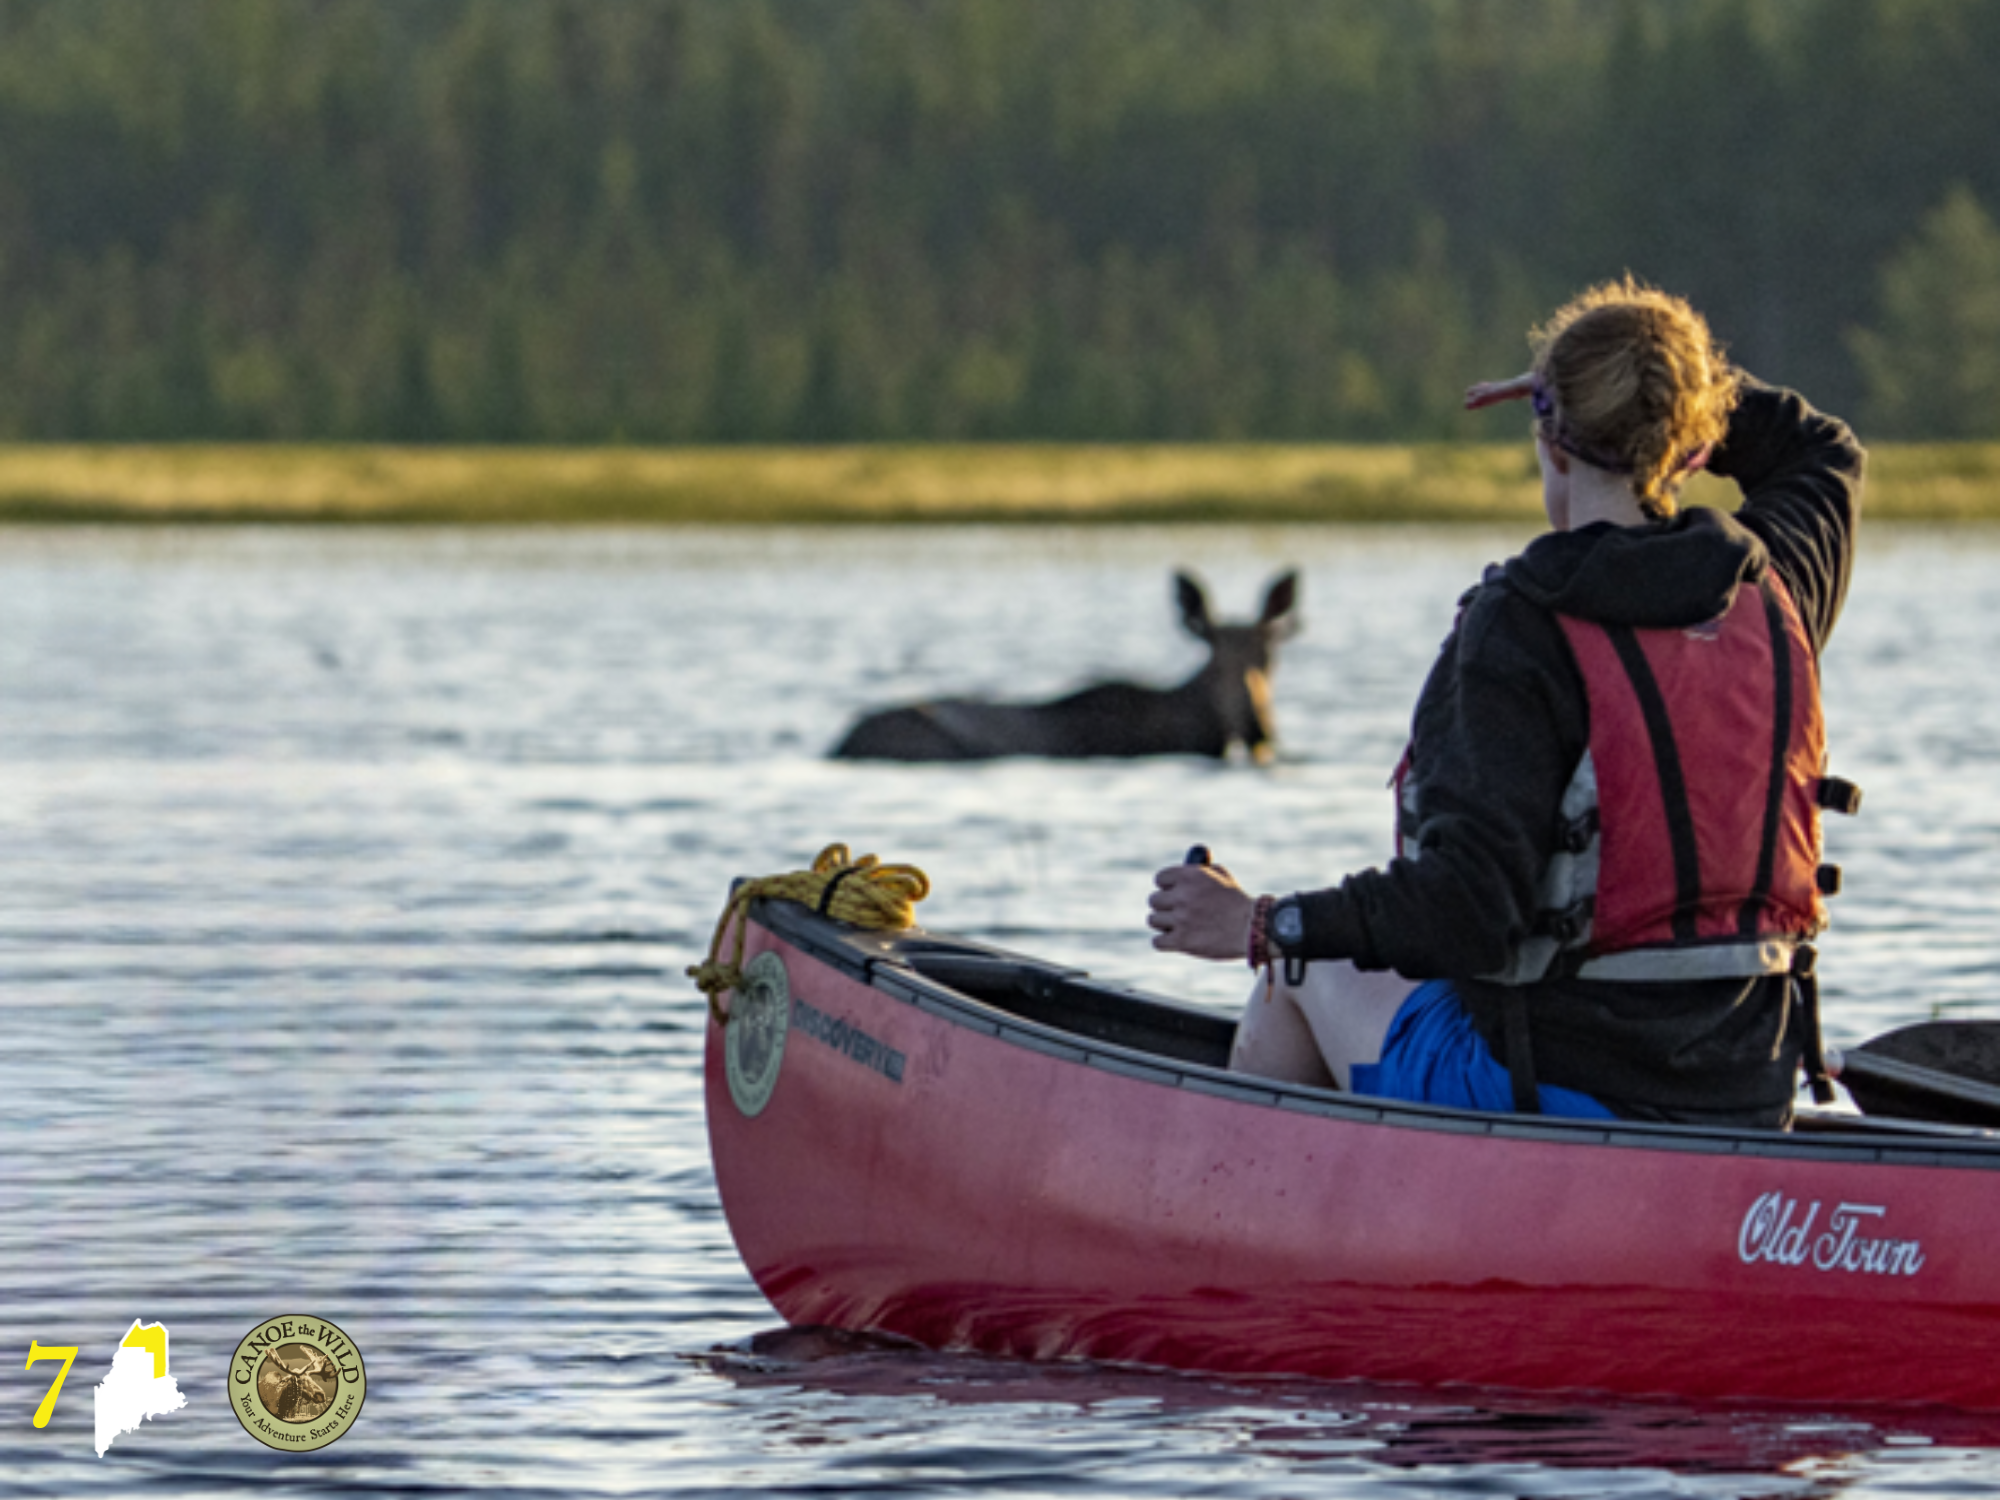 Get into the wild - a Registered Maine Guide ensures you experience it safely. PC Canoe the Wild